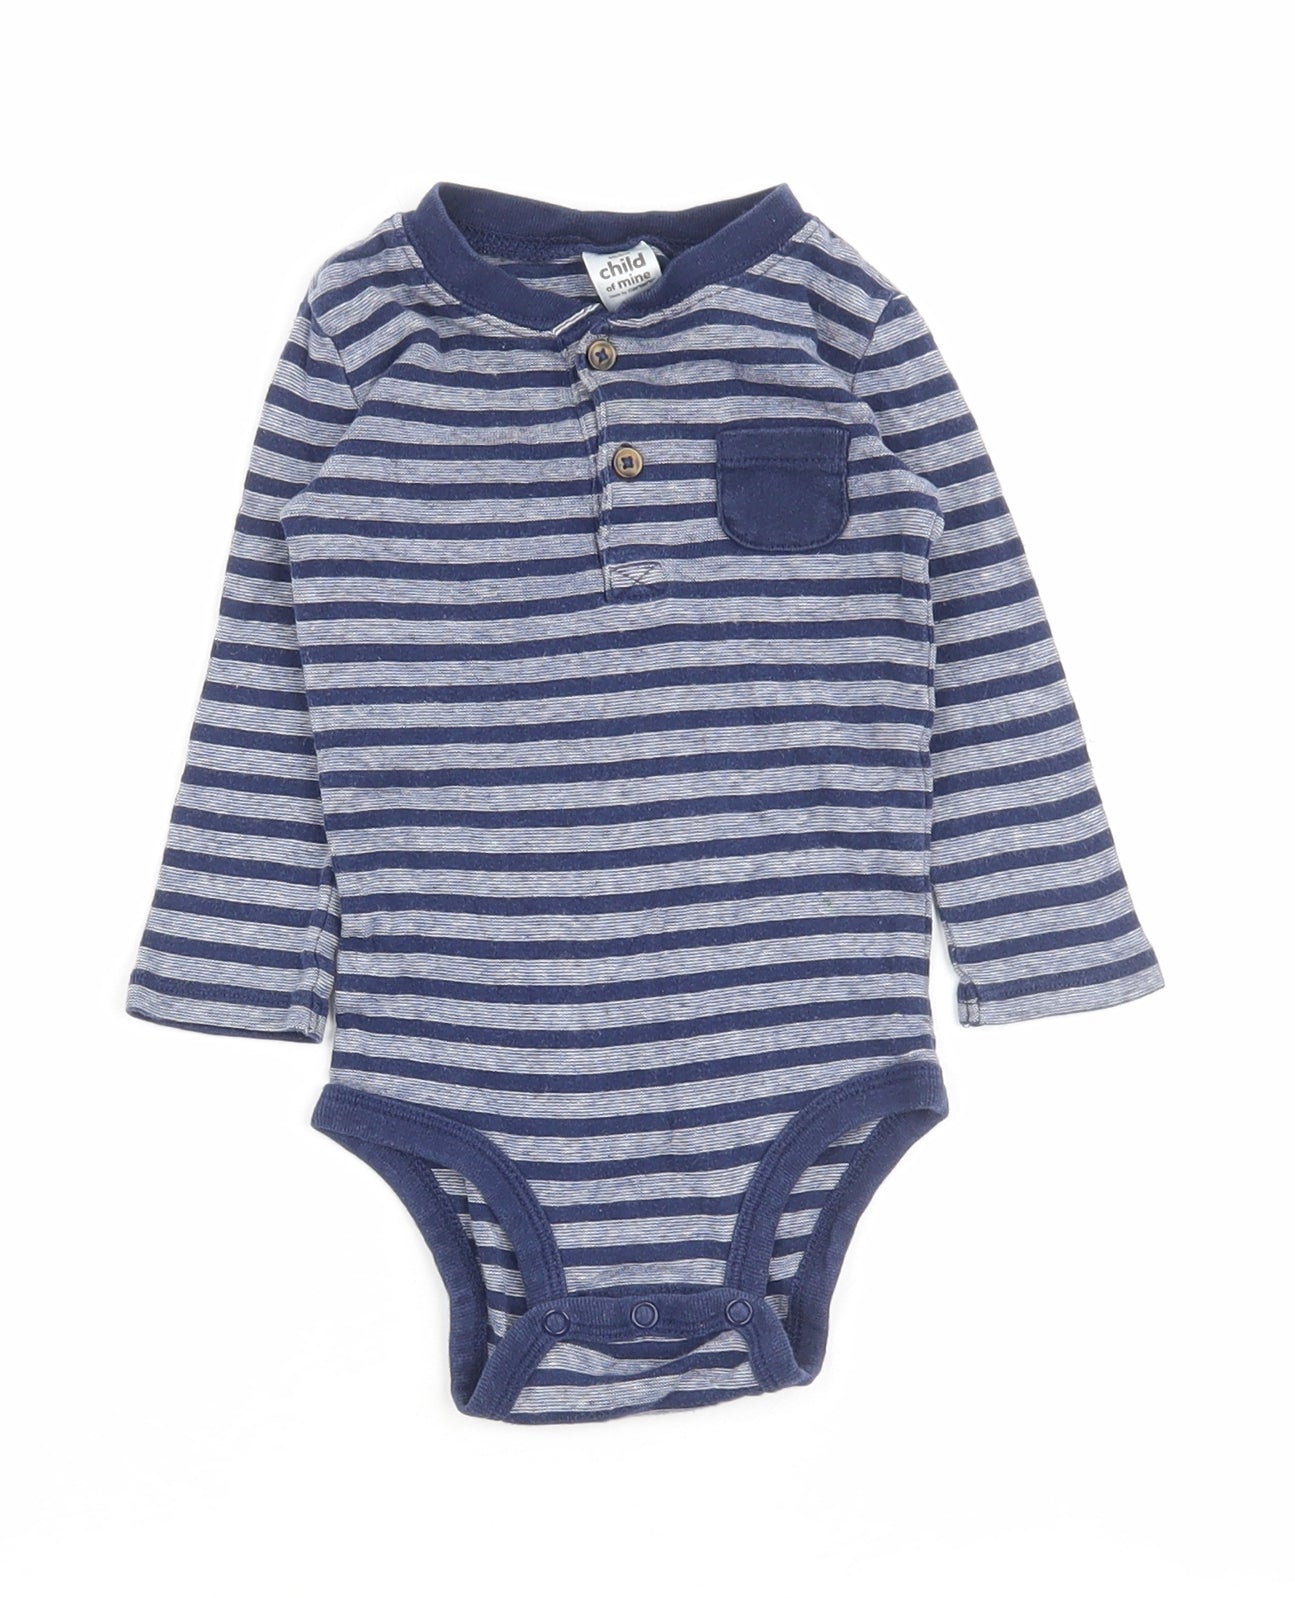 Child of Mine by Carter's Boys Blue Striped Cotton Bodysuit Outfit/Set Size 6-9 Months Snap